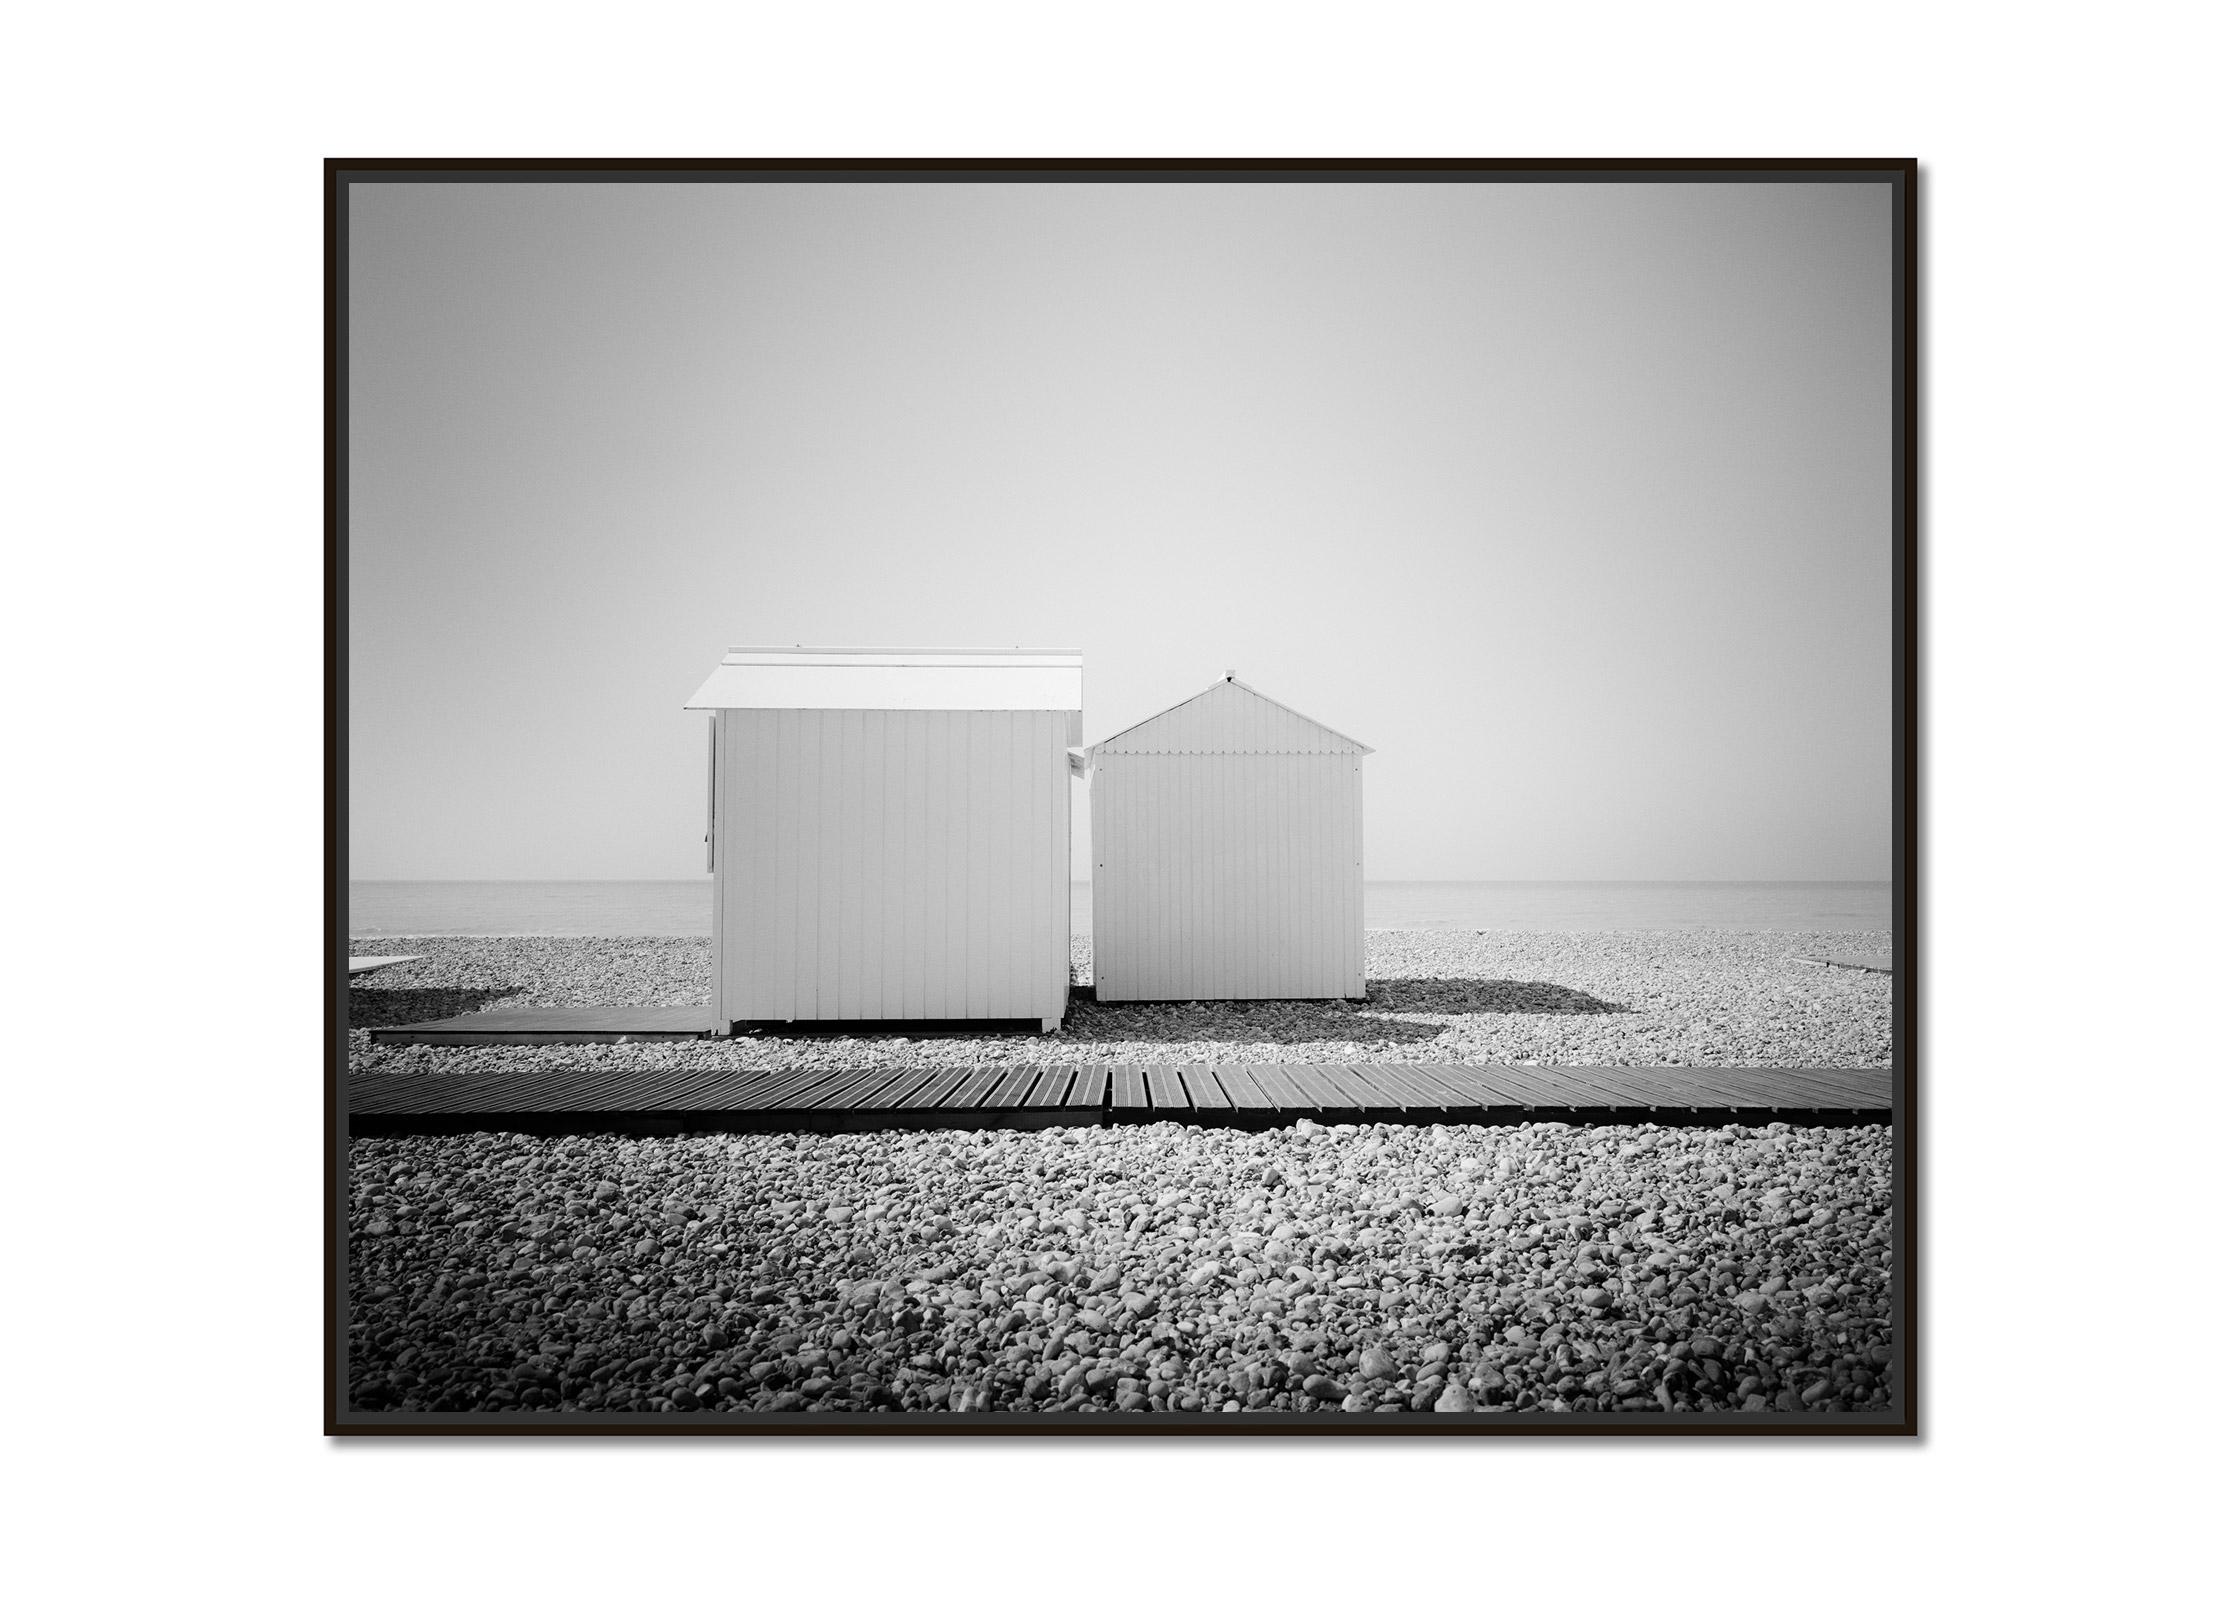 Esplanade, Beach Huts, Normandie, France, black and white landscape photography - Photograph by Gerald Berghammer